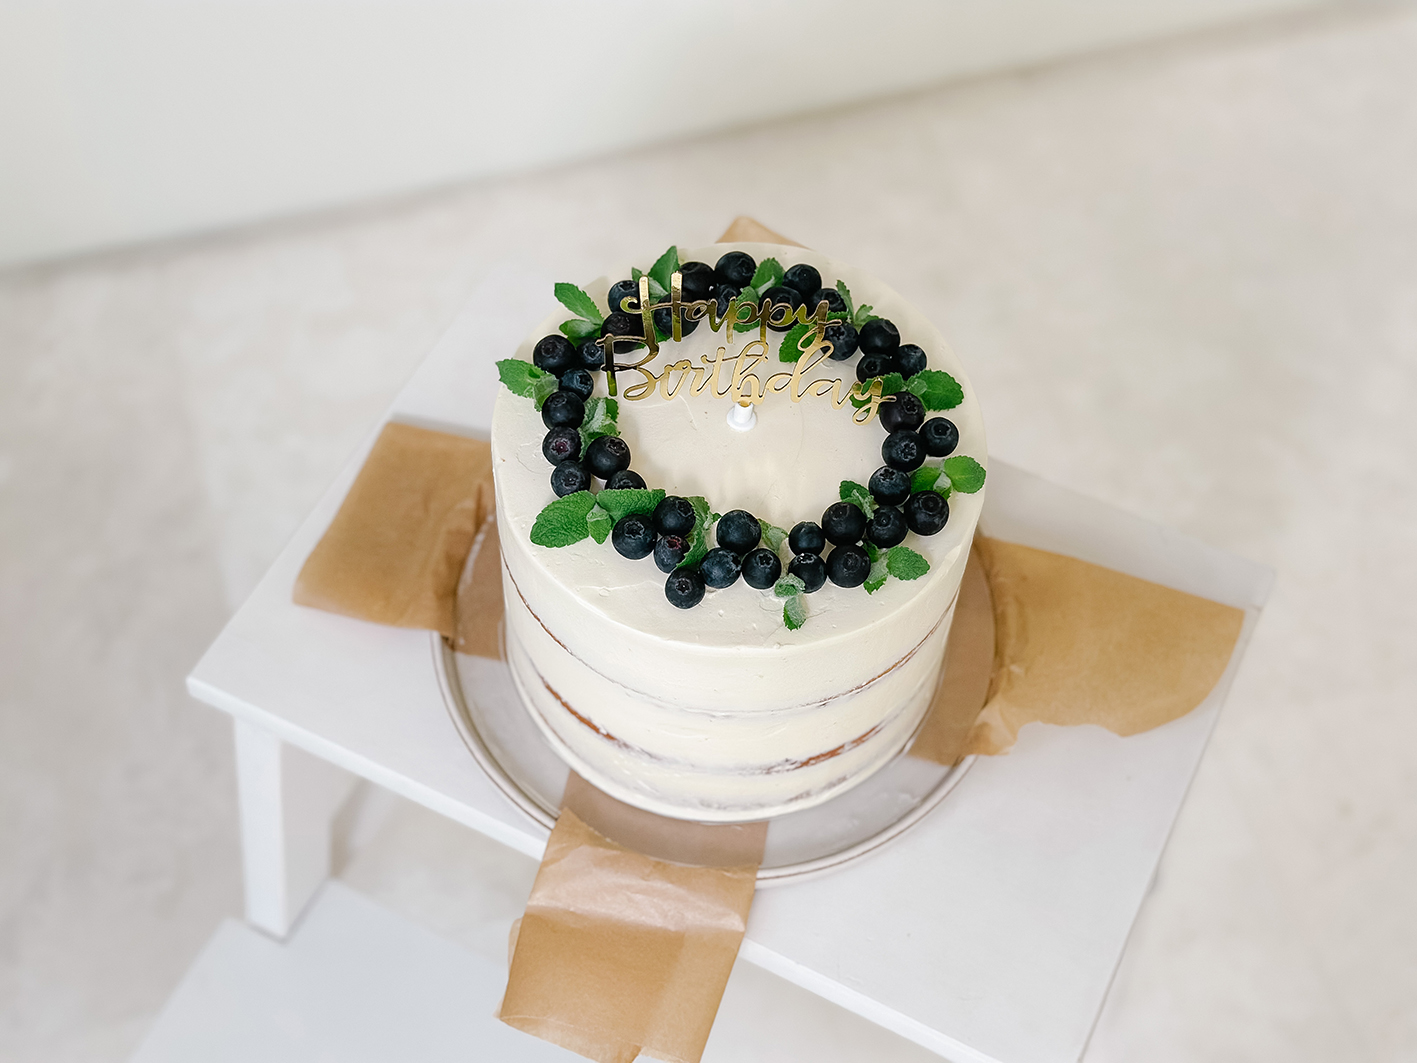 CosyFoxes-Milchmädchen-Buttercreme-Semi-Naked-Cake-Himbeer-Blaubeere-Torte